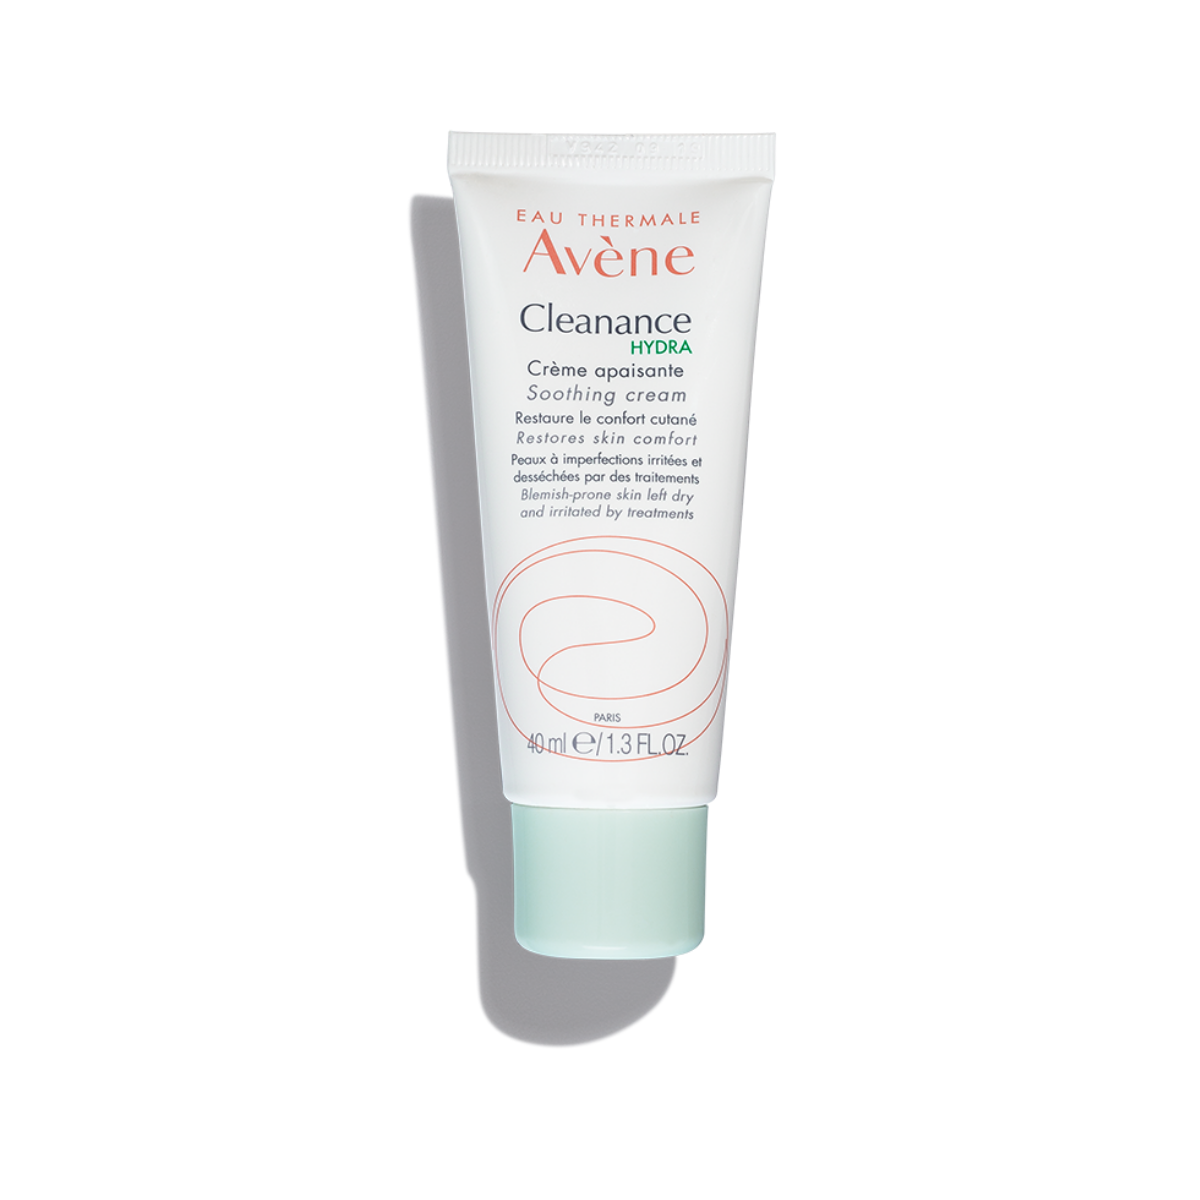 Primary image of Cleanance Hydra Soothing Cream